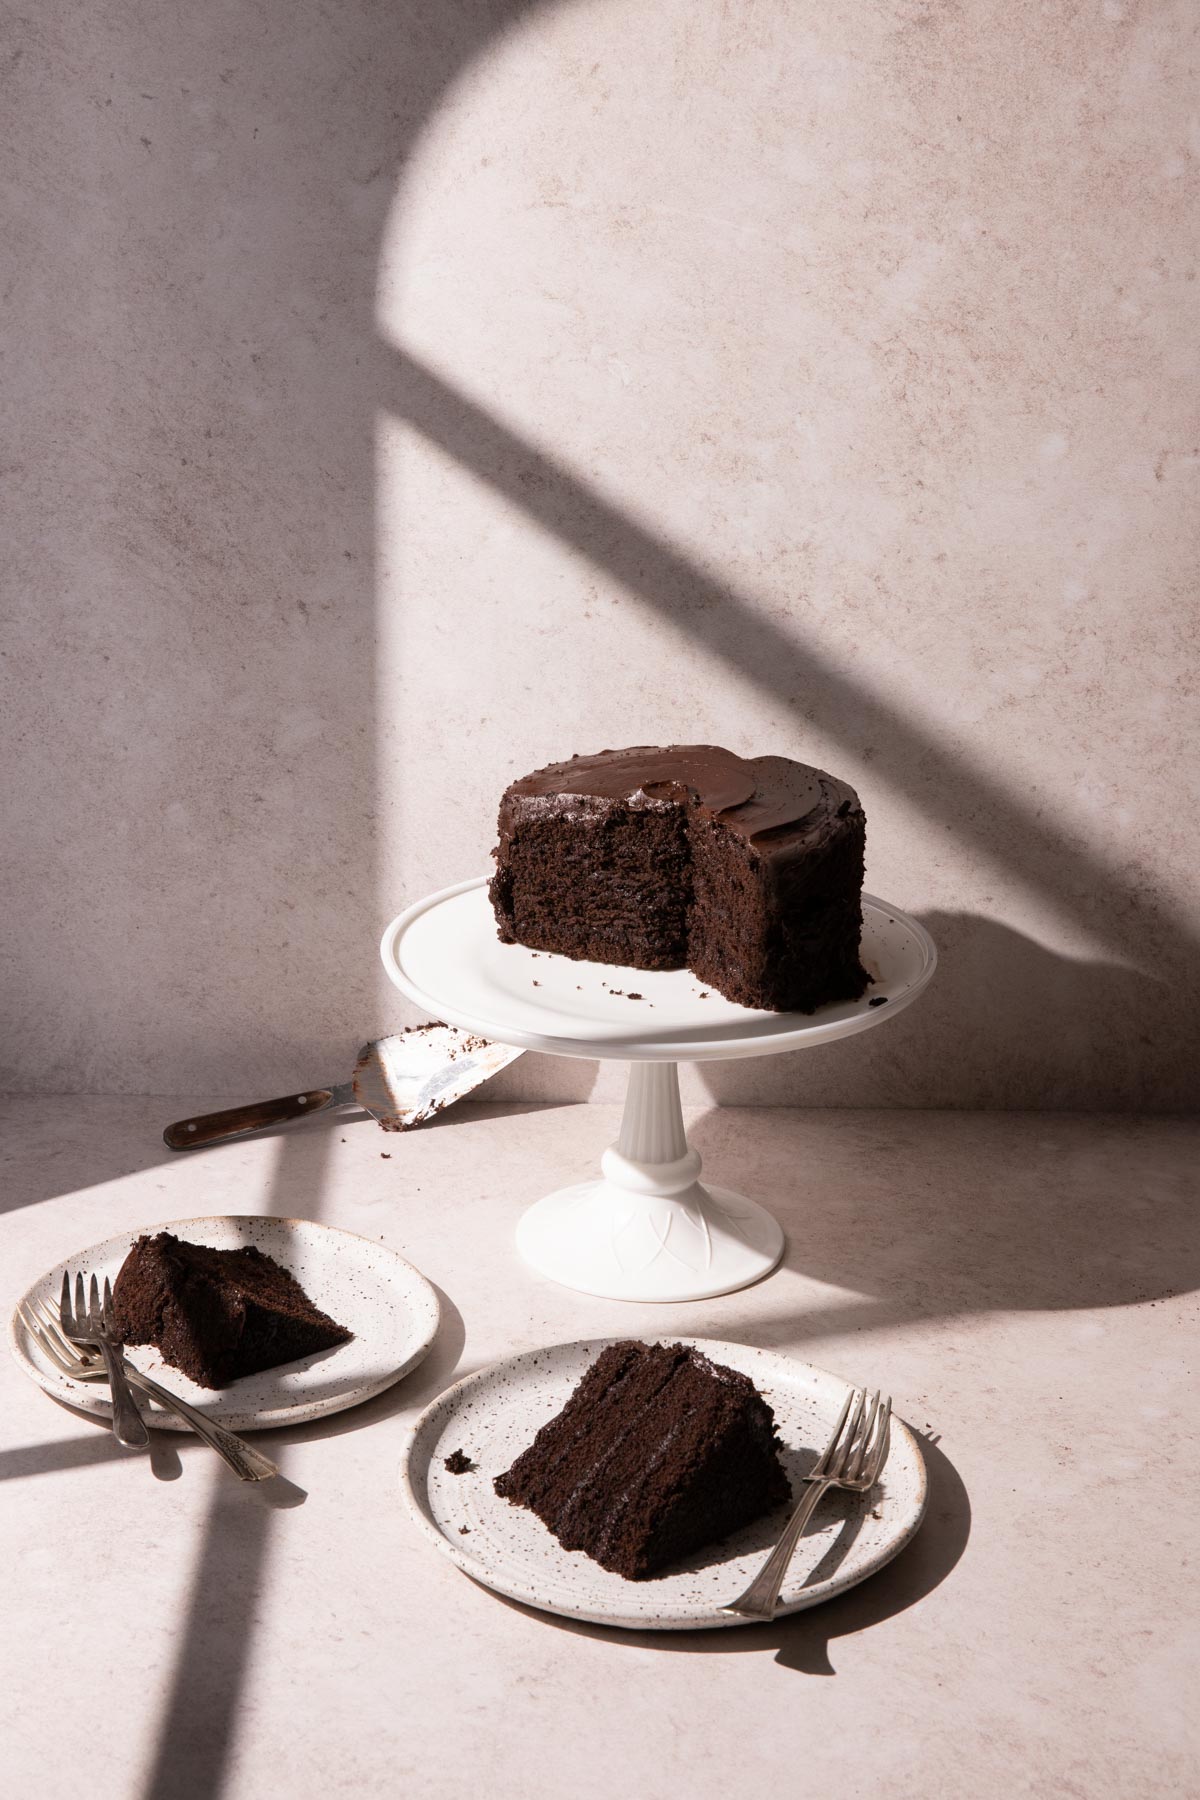 Chocolate cake on a cake stand with window light and shadows